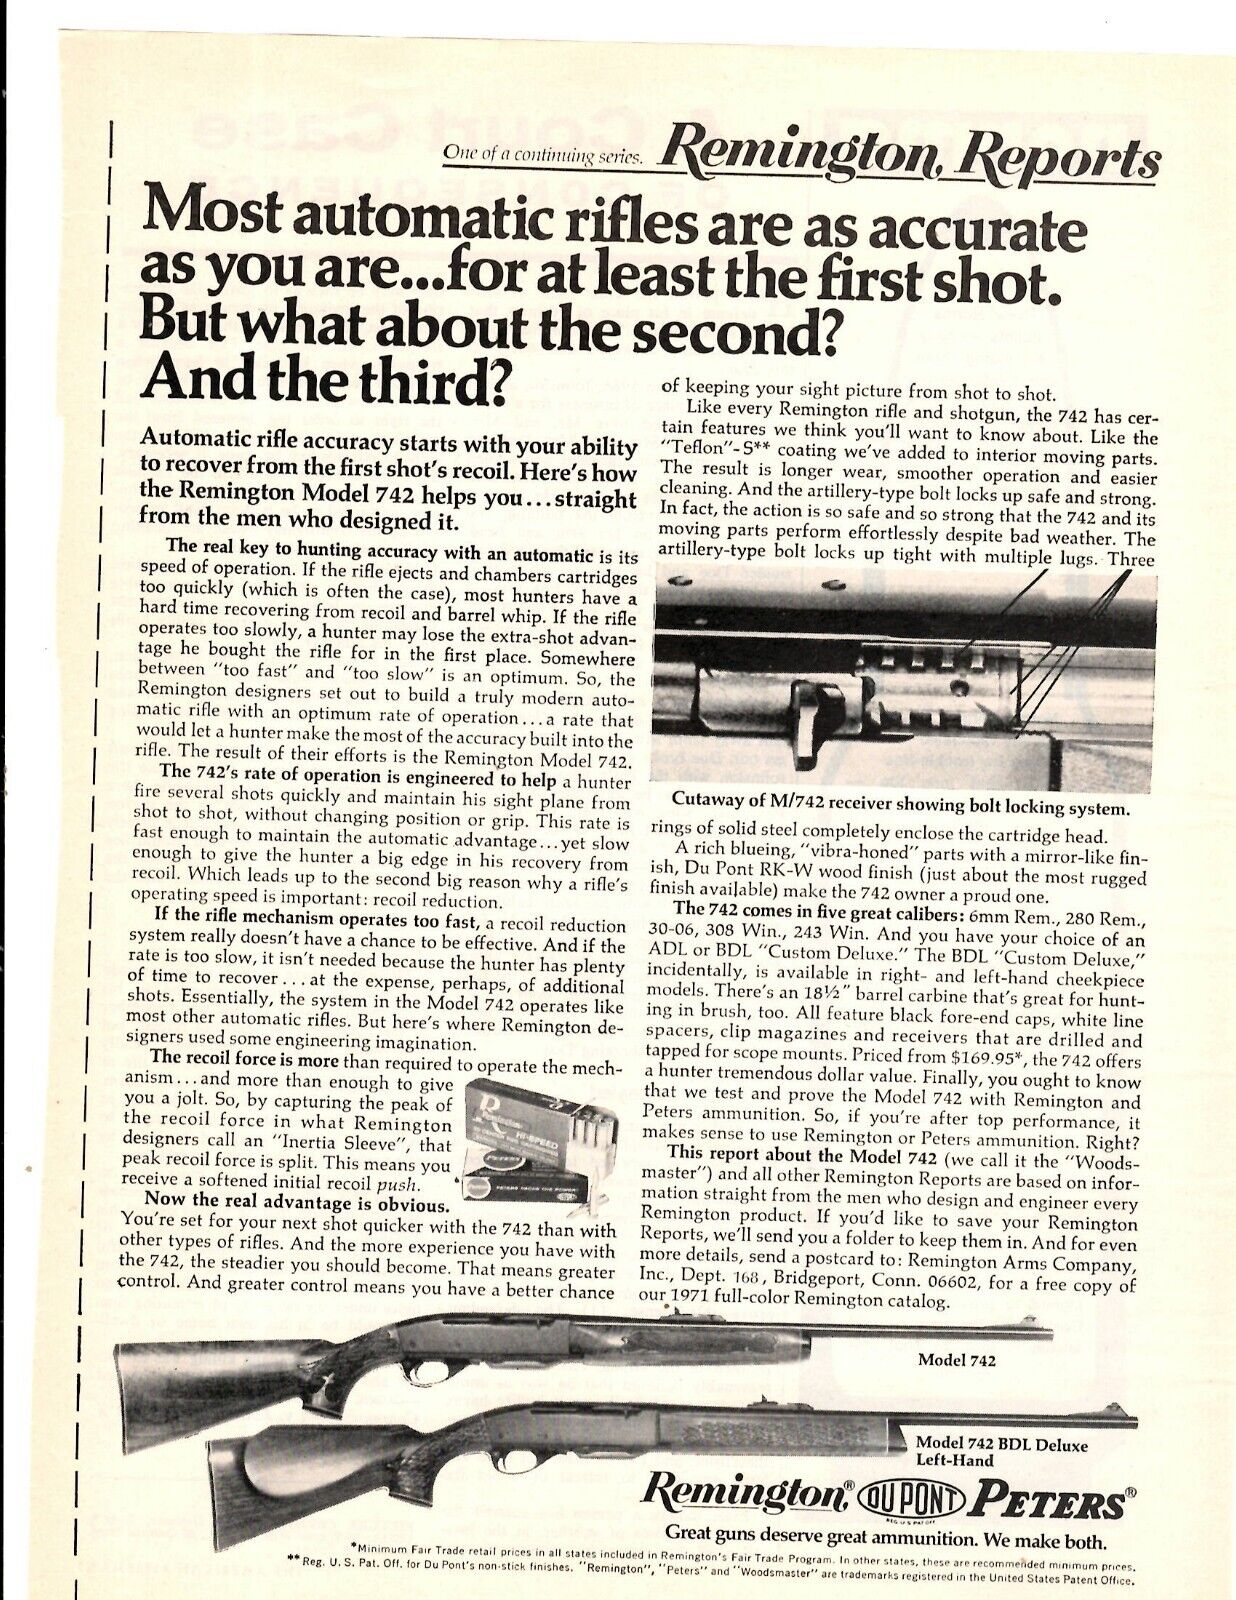 1971 Print Ad Remington Dupont Peters Model 742 Model 742 BDL Deluxe Left Hand